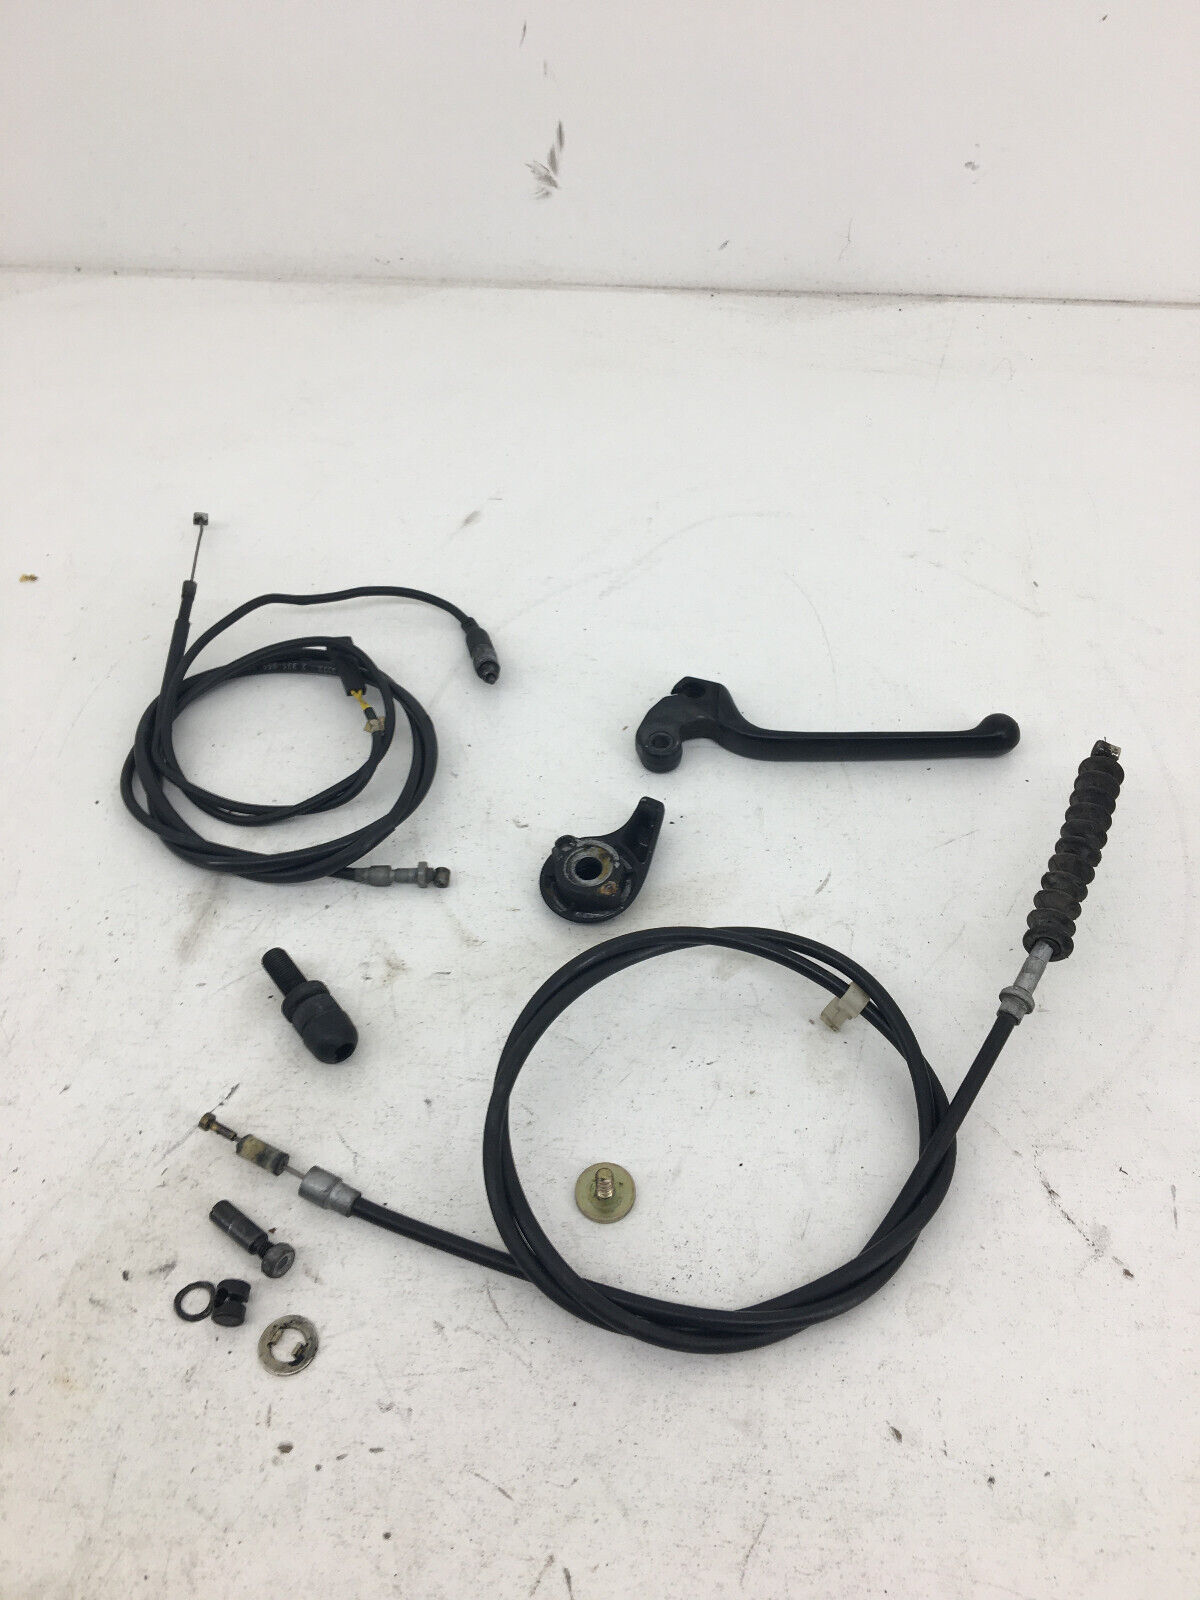 1996 - 2001 BMW R1100RT Clutch and Choke Cables and Lever